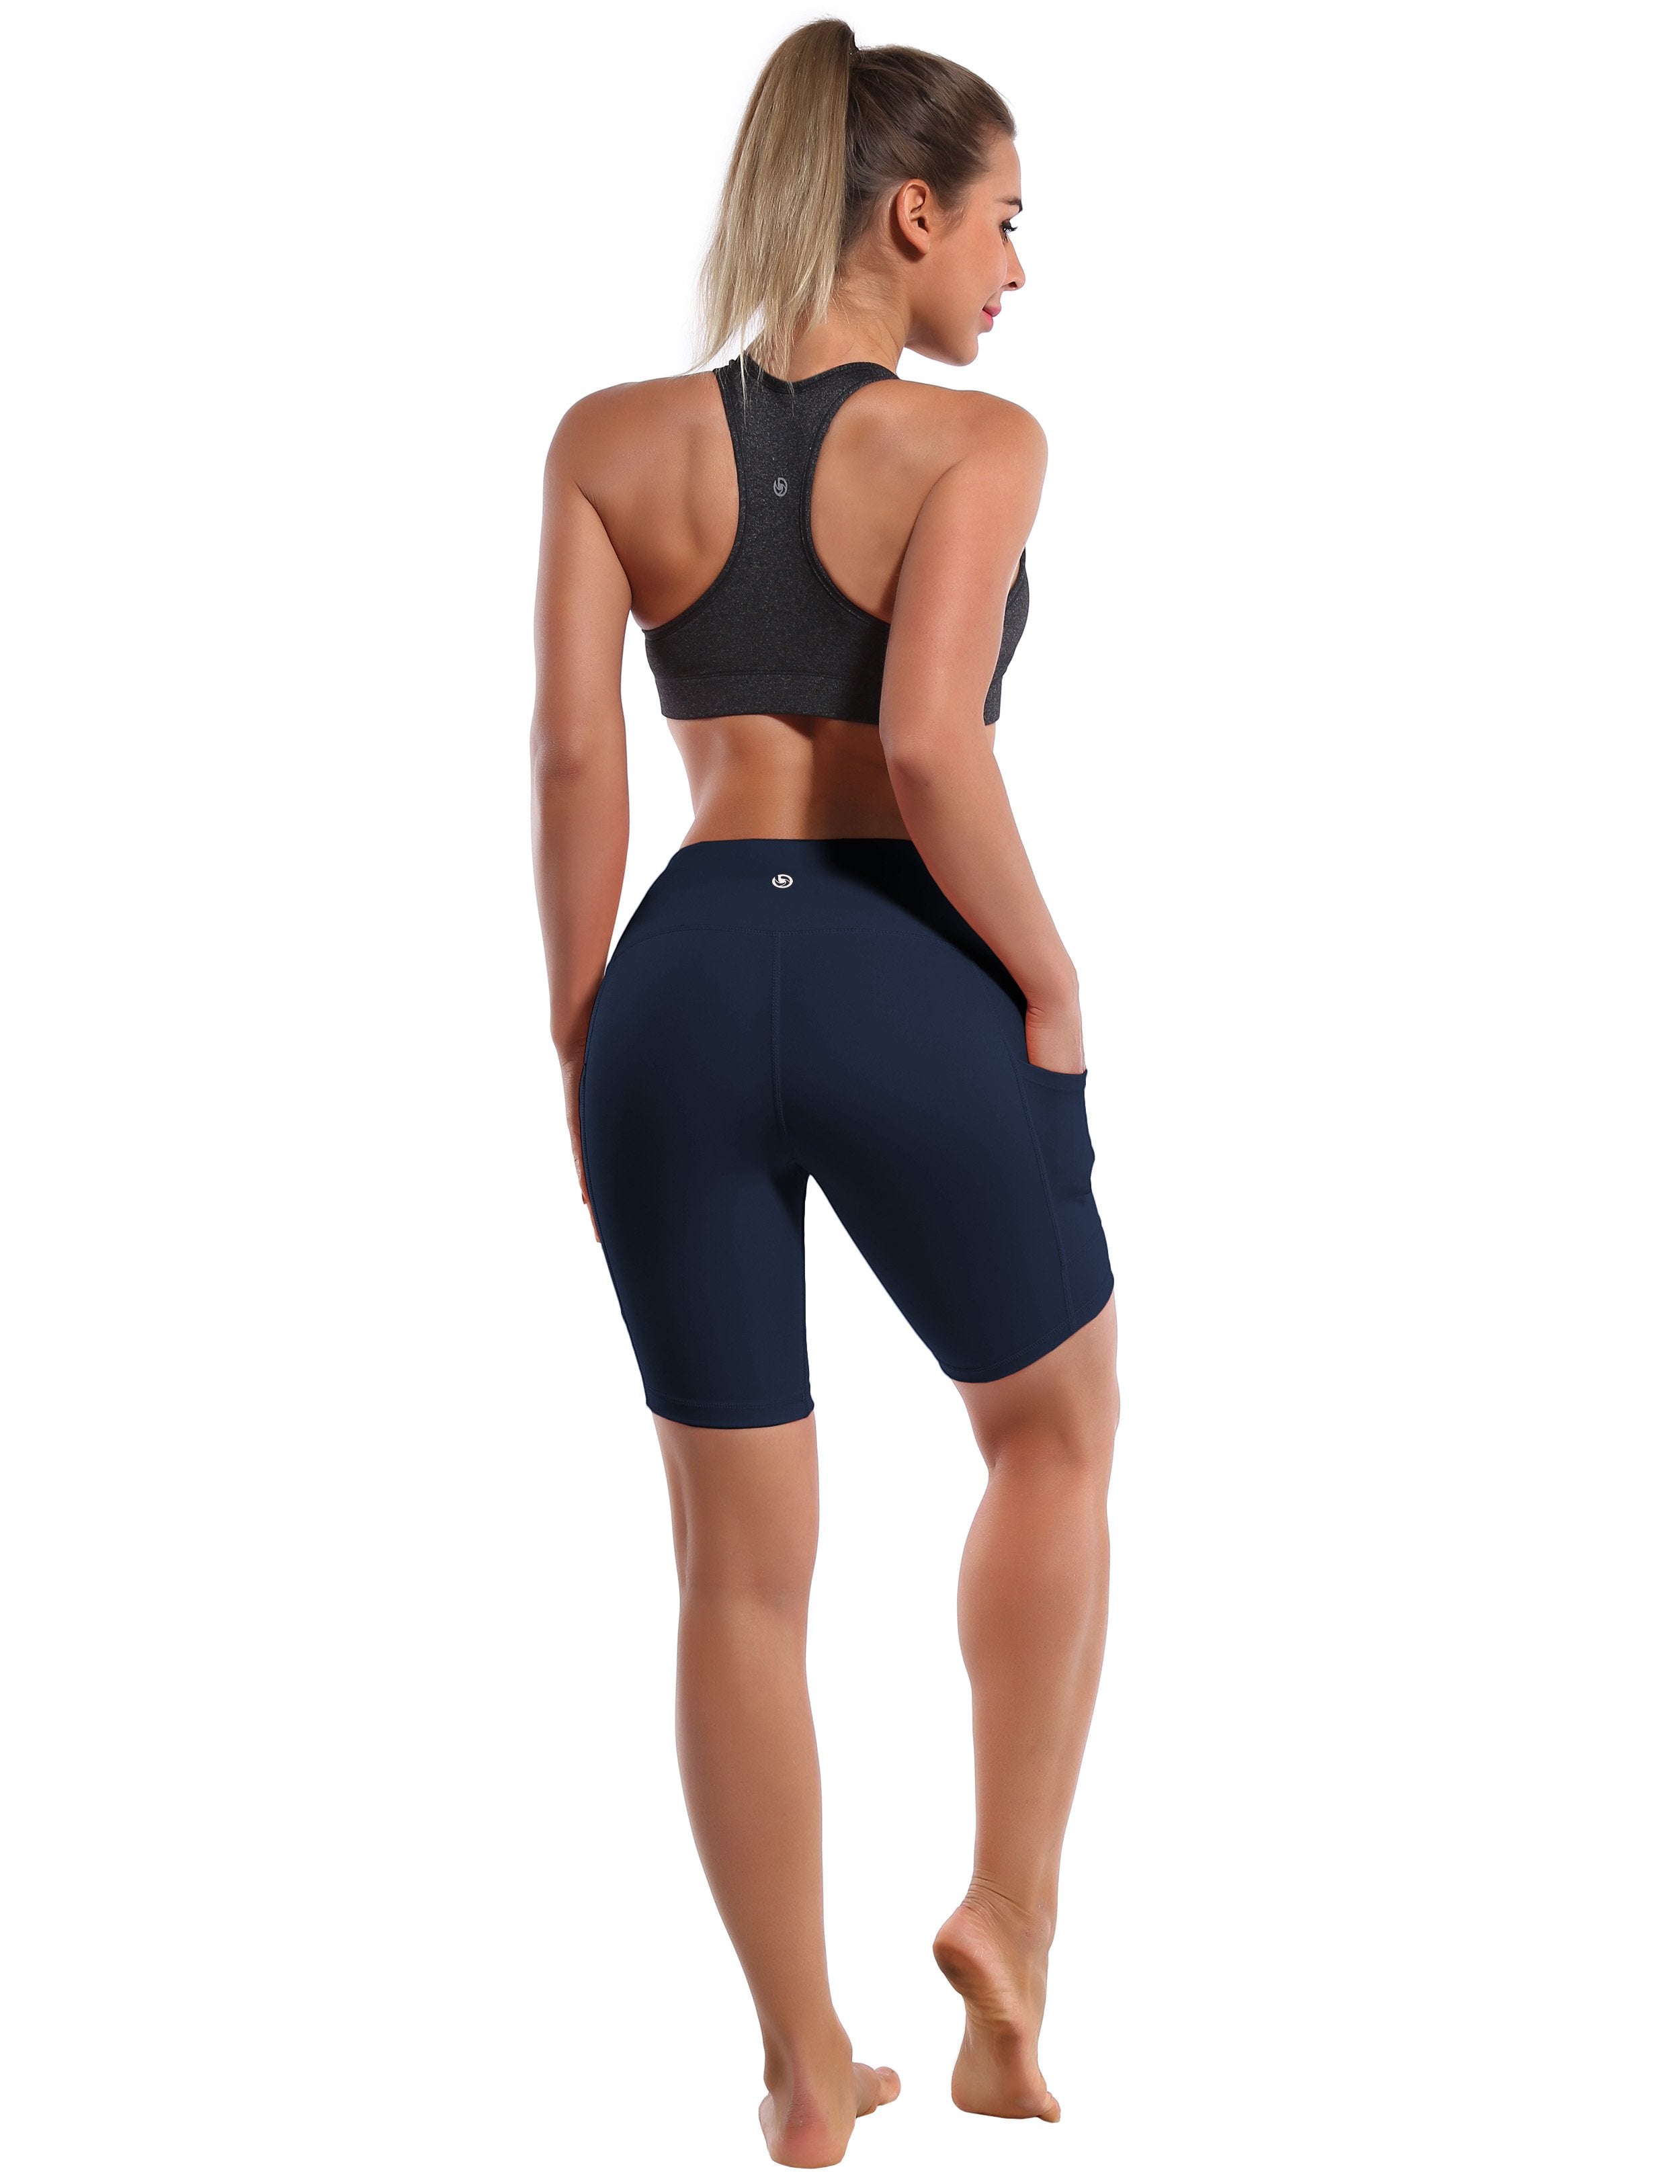 8" Side Pockets Jogging Shorts darknavy Sleek, soft, smooth and totally comfortable: our newest style is here. Softest-ever fabric High elasticity High density 4-way stretch Fabric doesn't attract lint easily No see-through Moisture-wicking Machine wash 75% Nylon, 25% Spandex